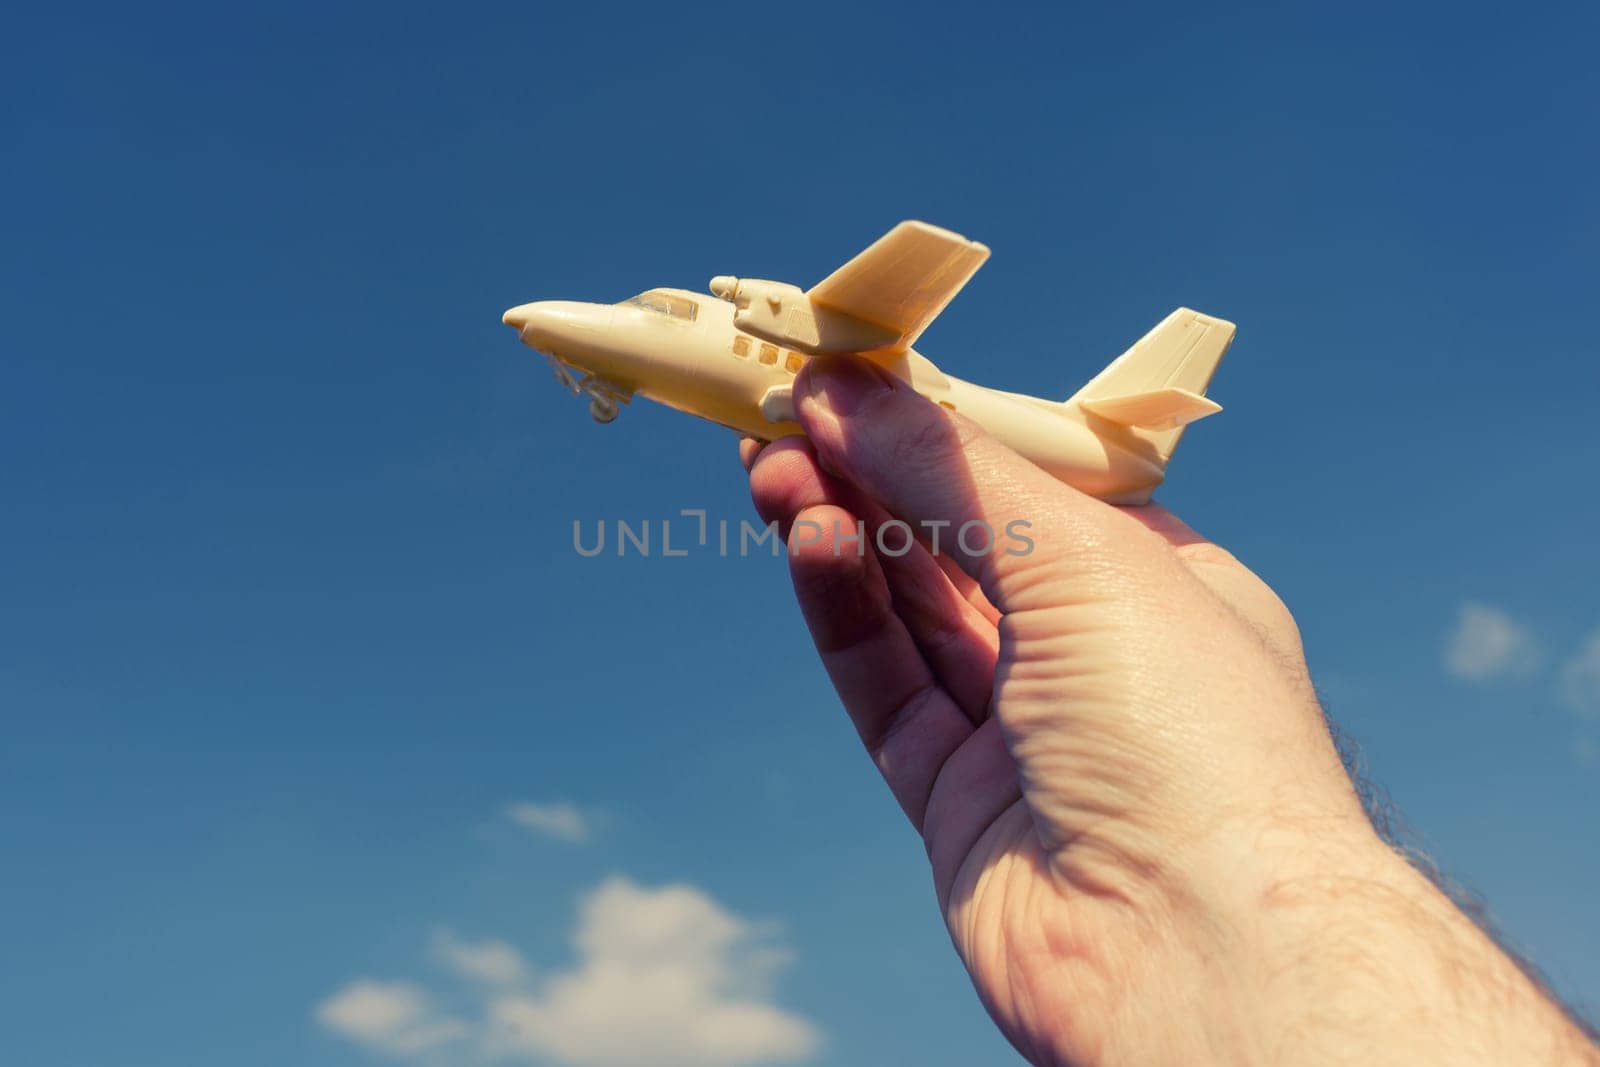 close up photo of male hand holding toy airplane against blue sky . image is retro filtered